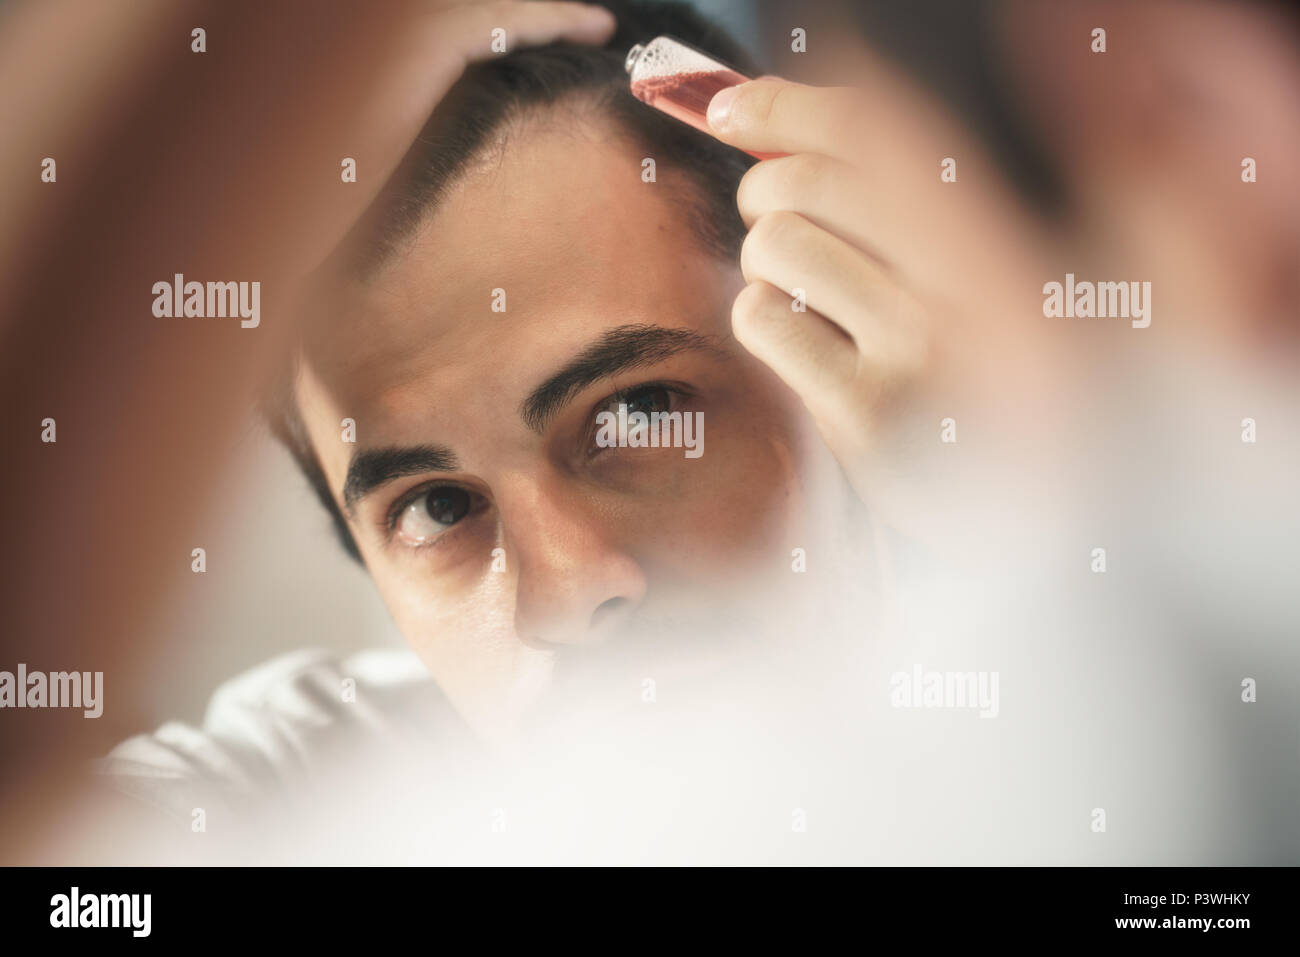 Young Man Applying Lotion For Alopecia And Hair Loss Treatment Stock Photo